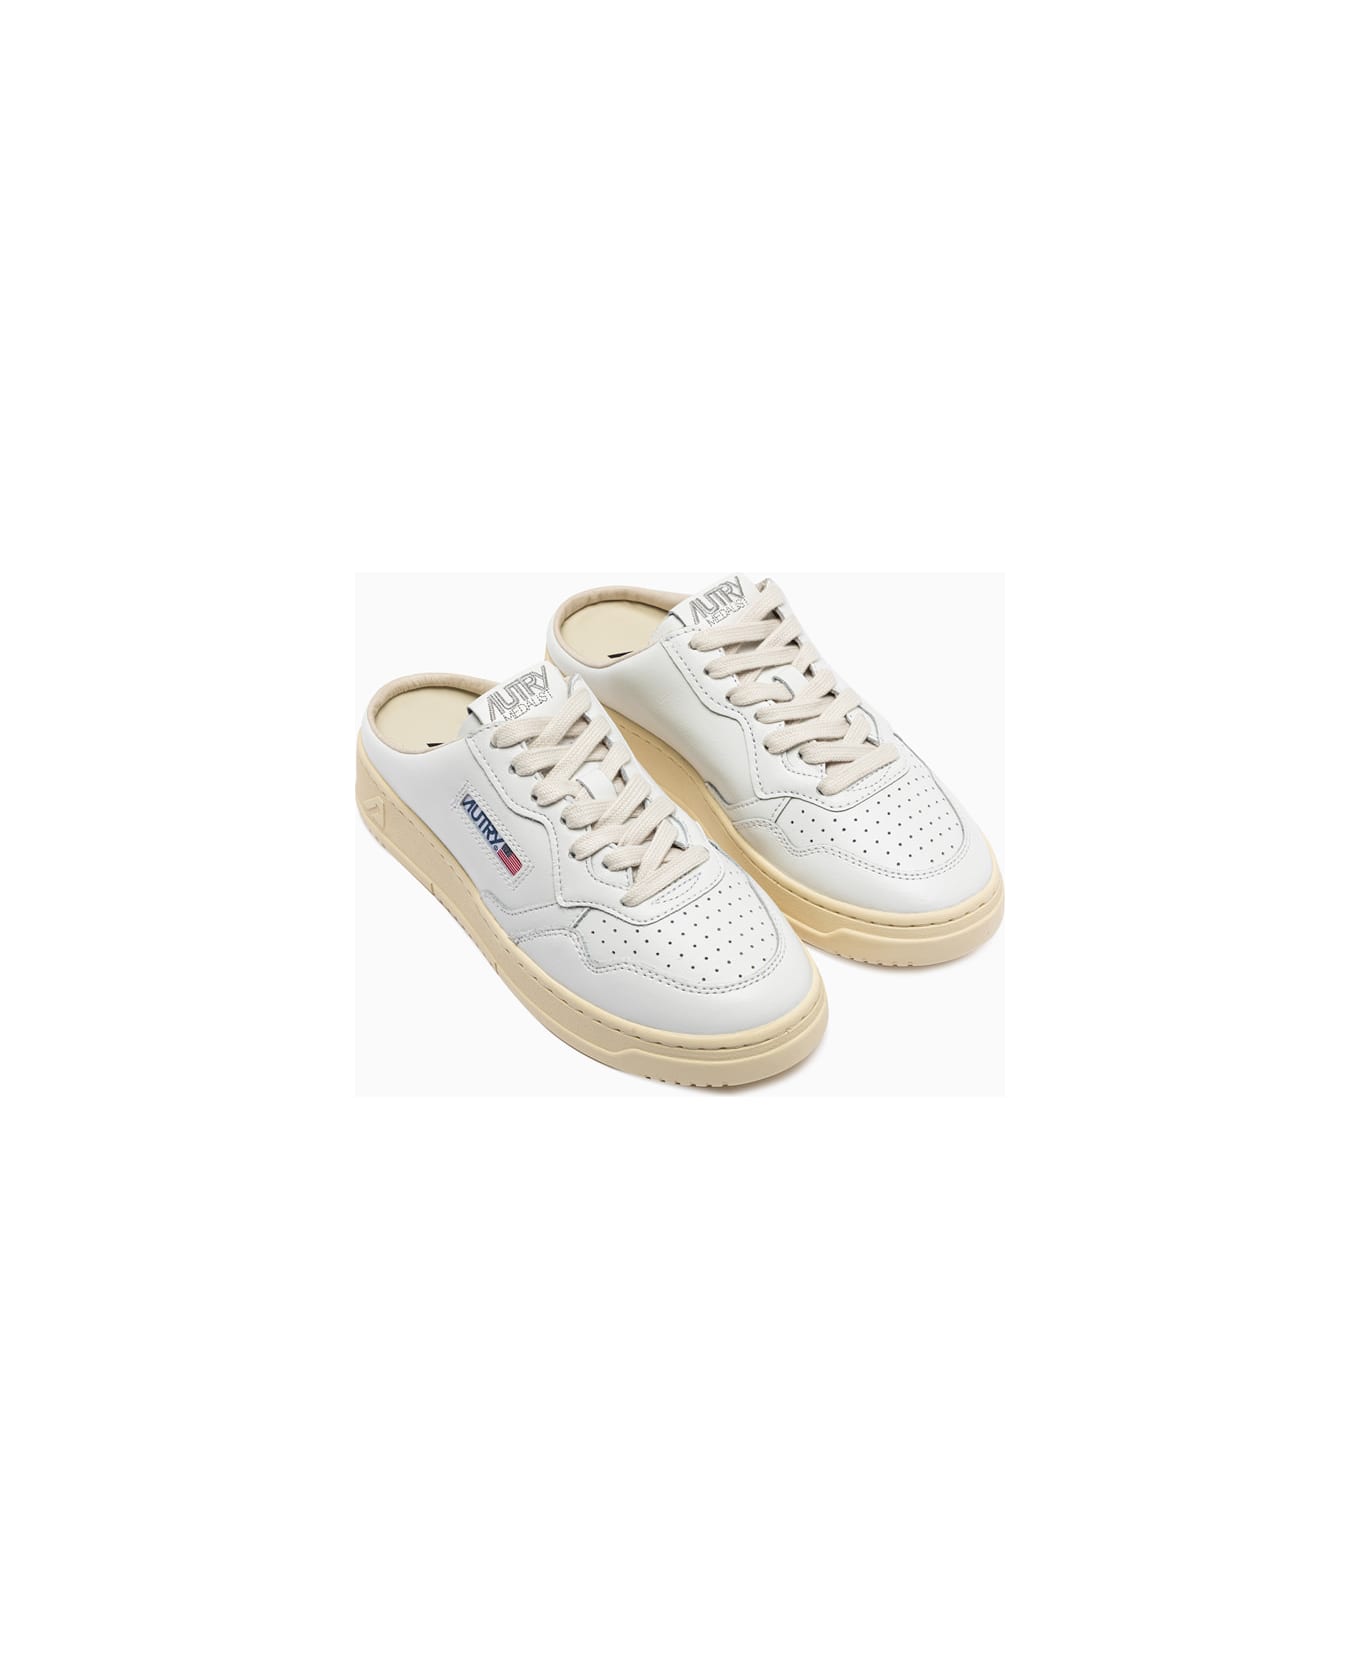 Autry Medalist Mule Sneakers Mulw Ll15 - White フラットシューズ